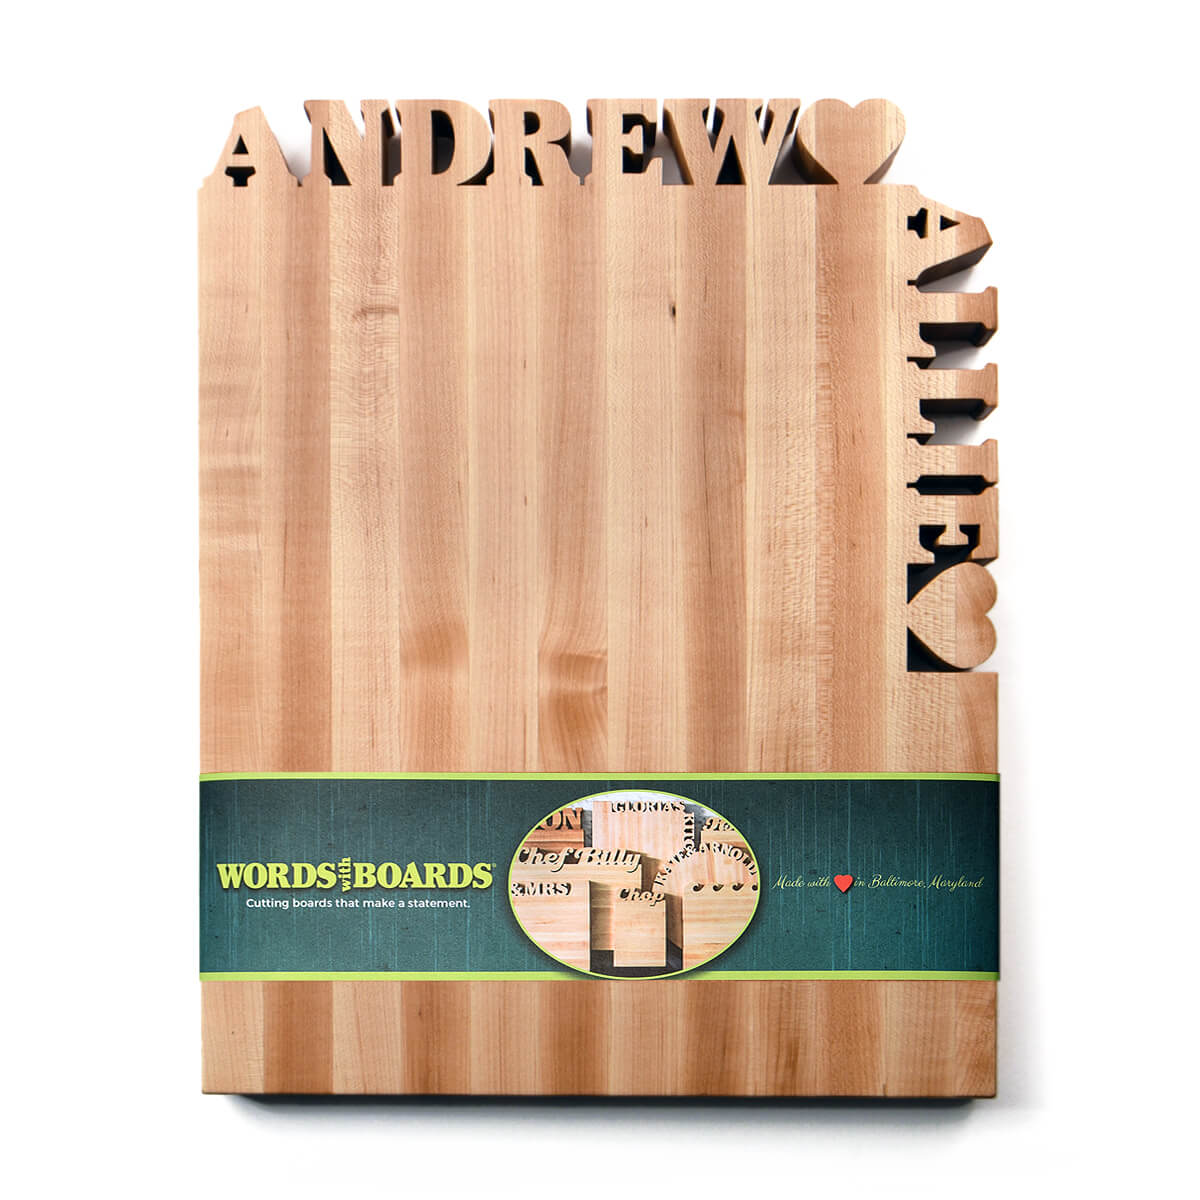 Personalized Kitchen Tools Wood Engraved Cutting Boards – The